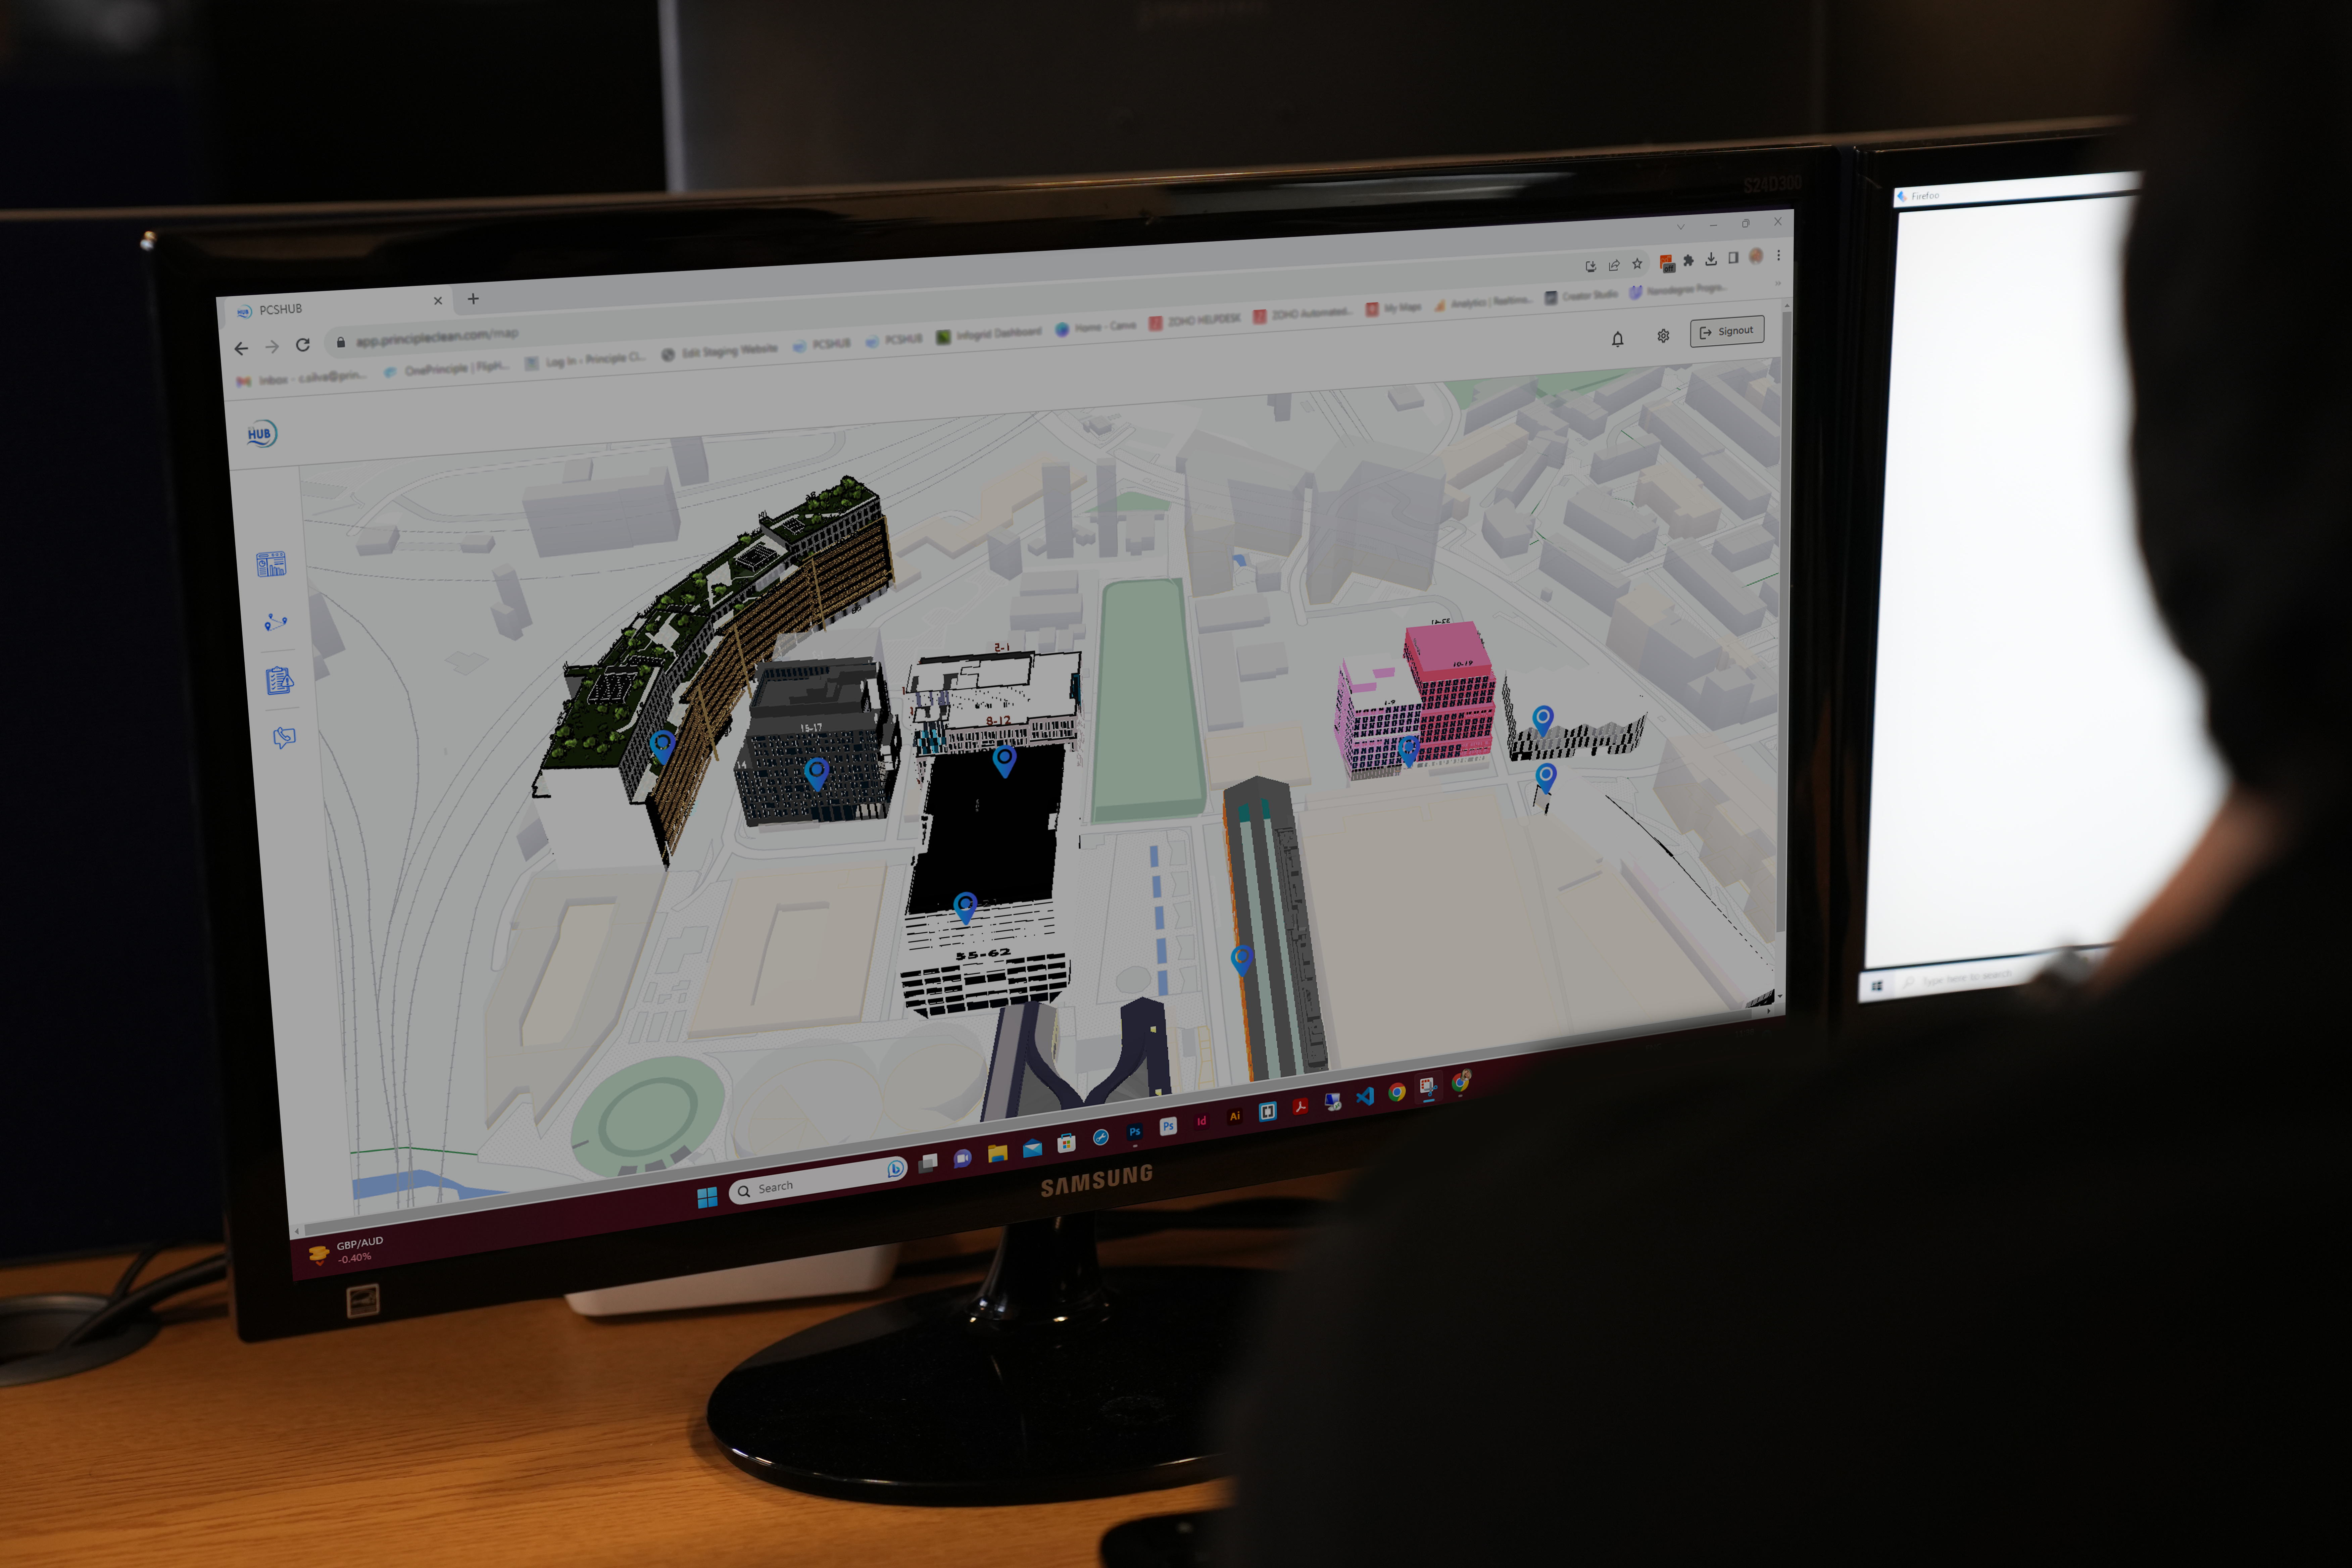 Double awards recognition for Principle’s cutting-edge 3D Mapping tech